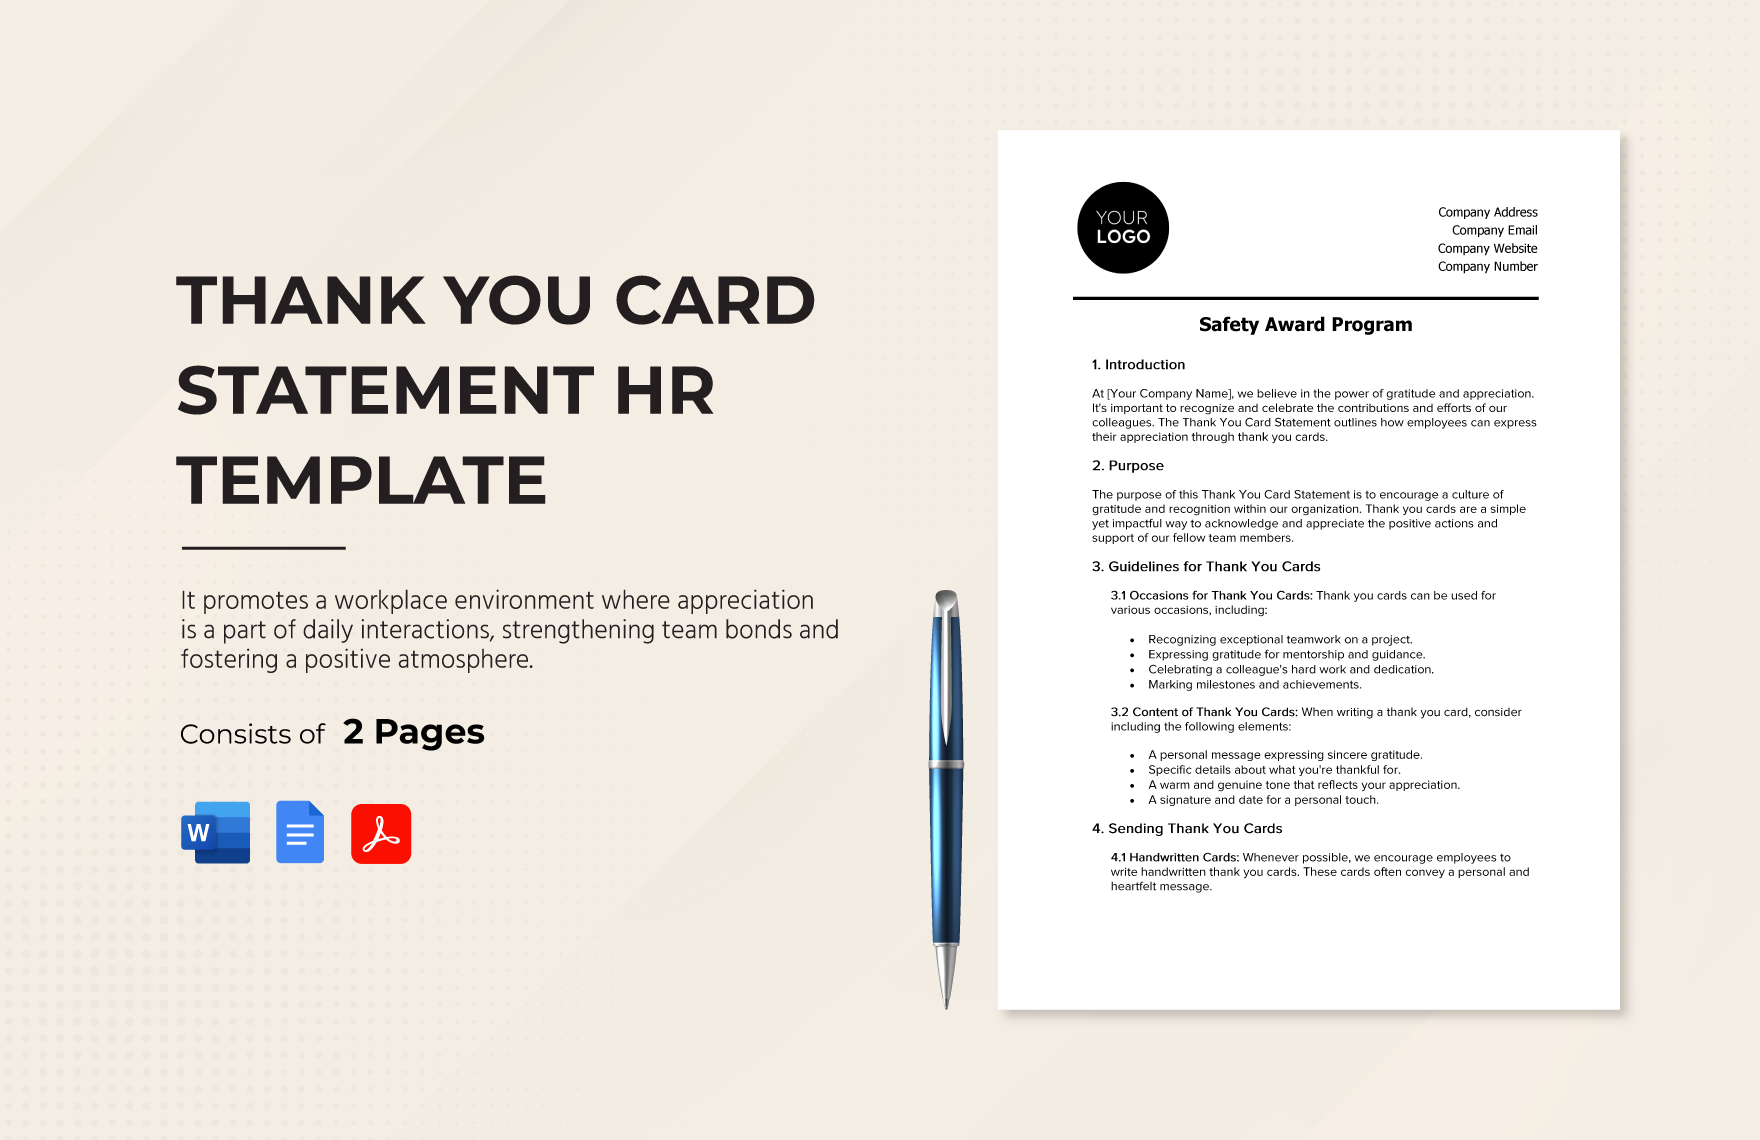 Thank You Card Statement HR Template